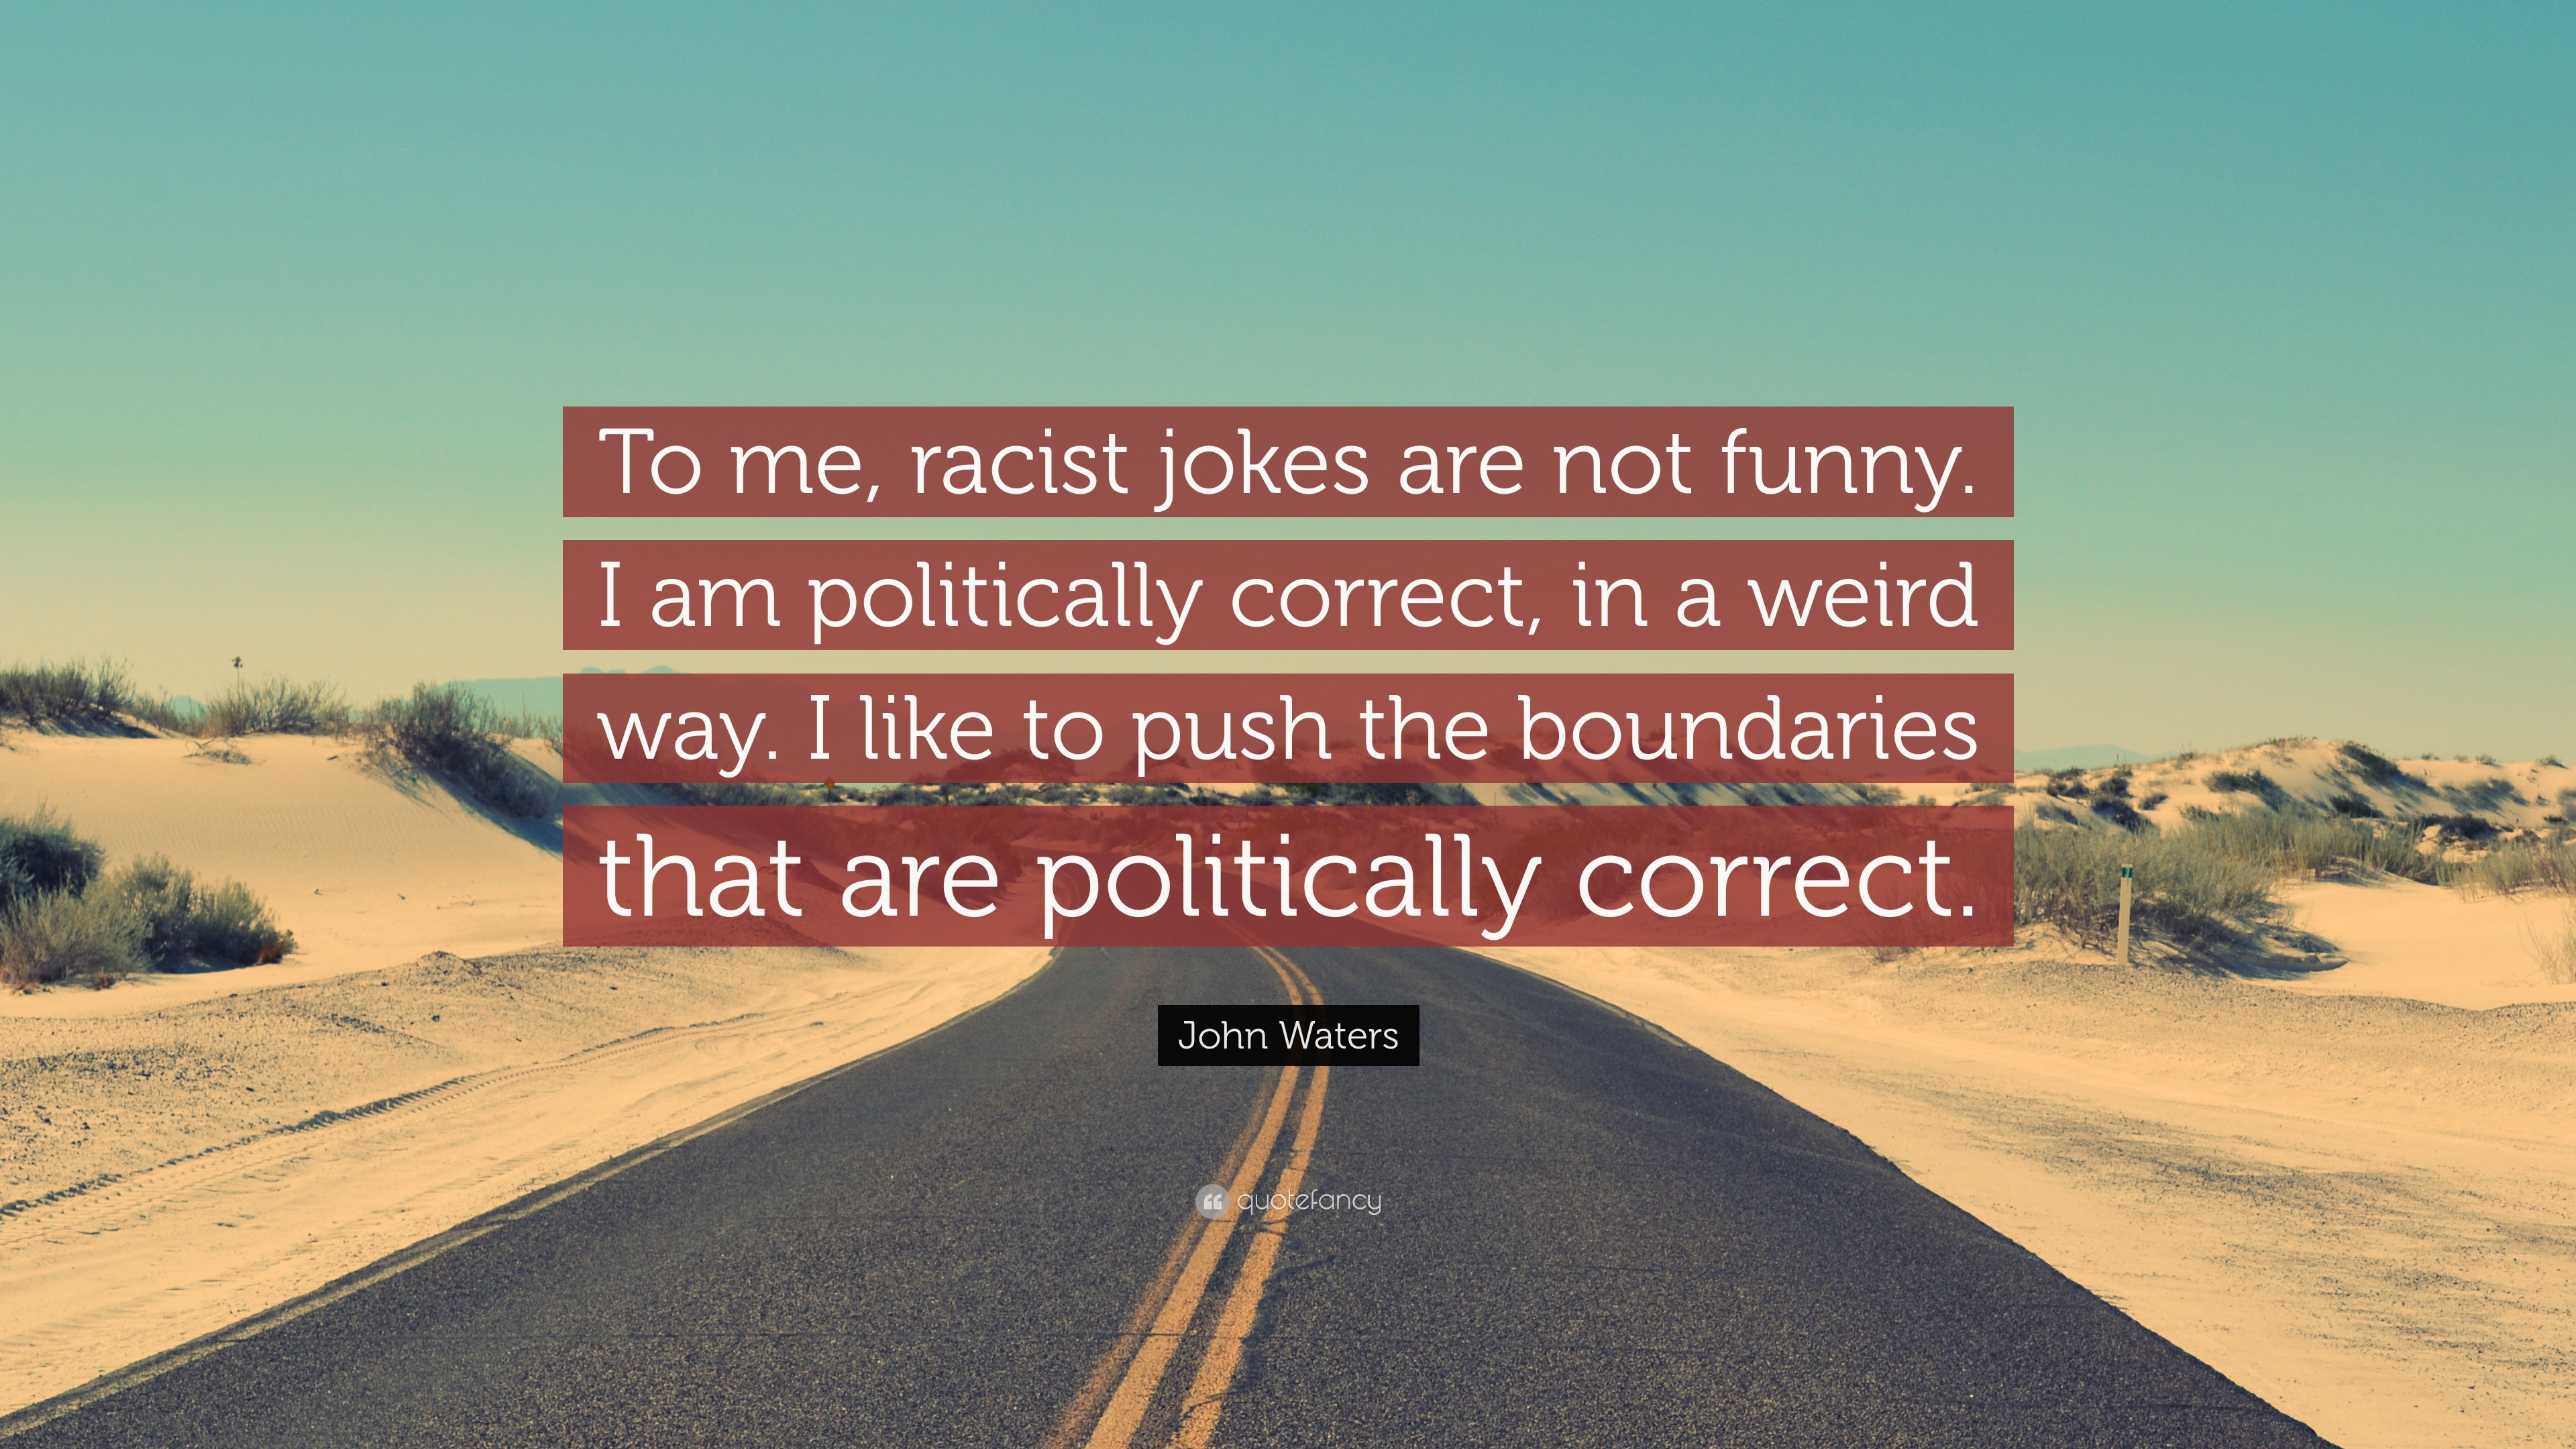 John Waters Quote: “To me, racist jokes are not funny. I am politically  correct, in a weird way. I like to push the boundaries that are poli...”